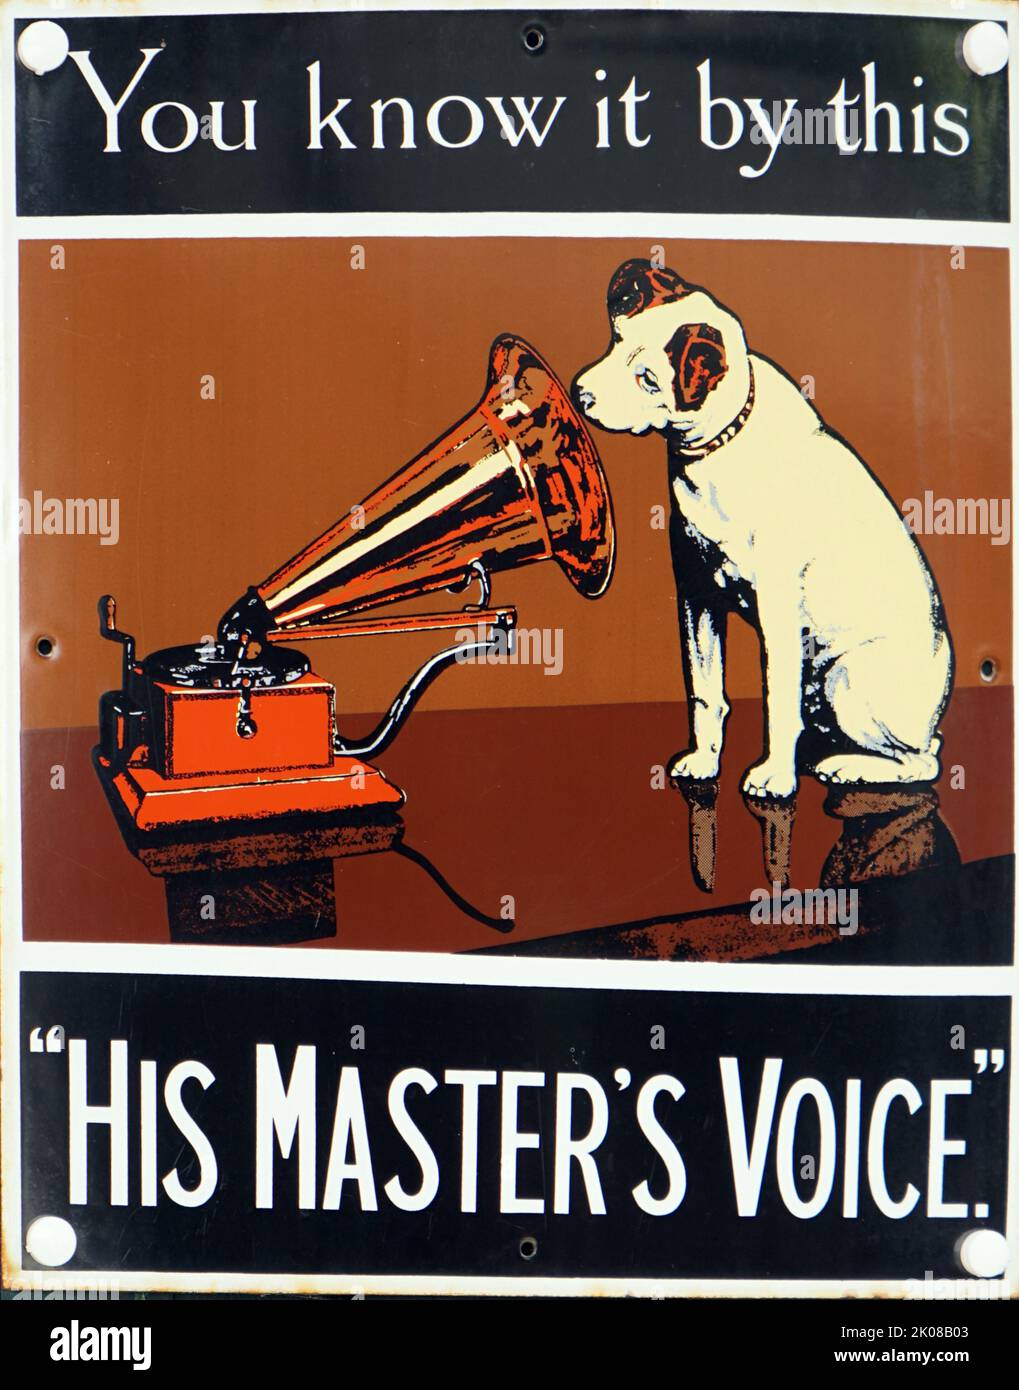 Advertisement for His Master's Voice (HMV) was the name of a major British record label created in 1901 by The Gramophone Co. Ltd. The phrase was coined in the late 1890s as the title of a painting depicting a terrier-mix dog named Nipper listening to a wind-up disc gramophone and tilting his head Stock Photo